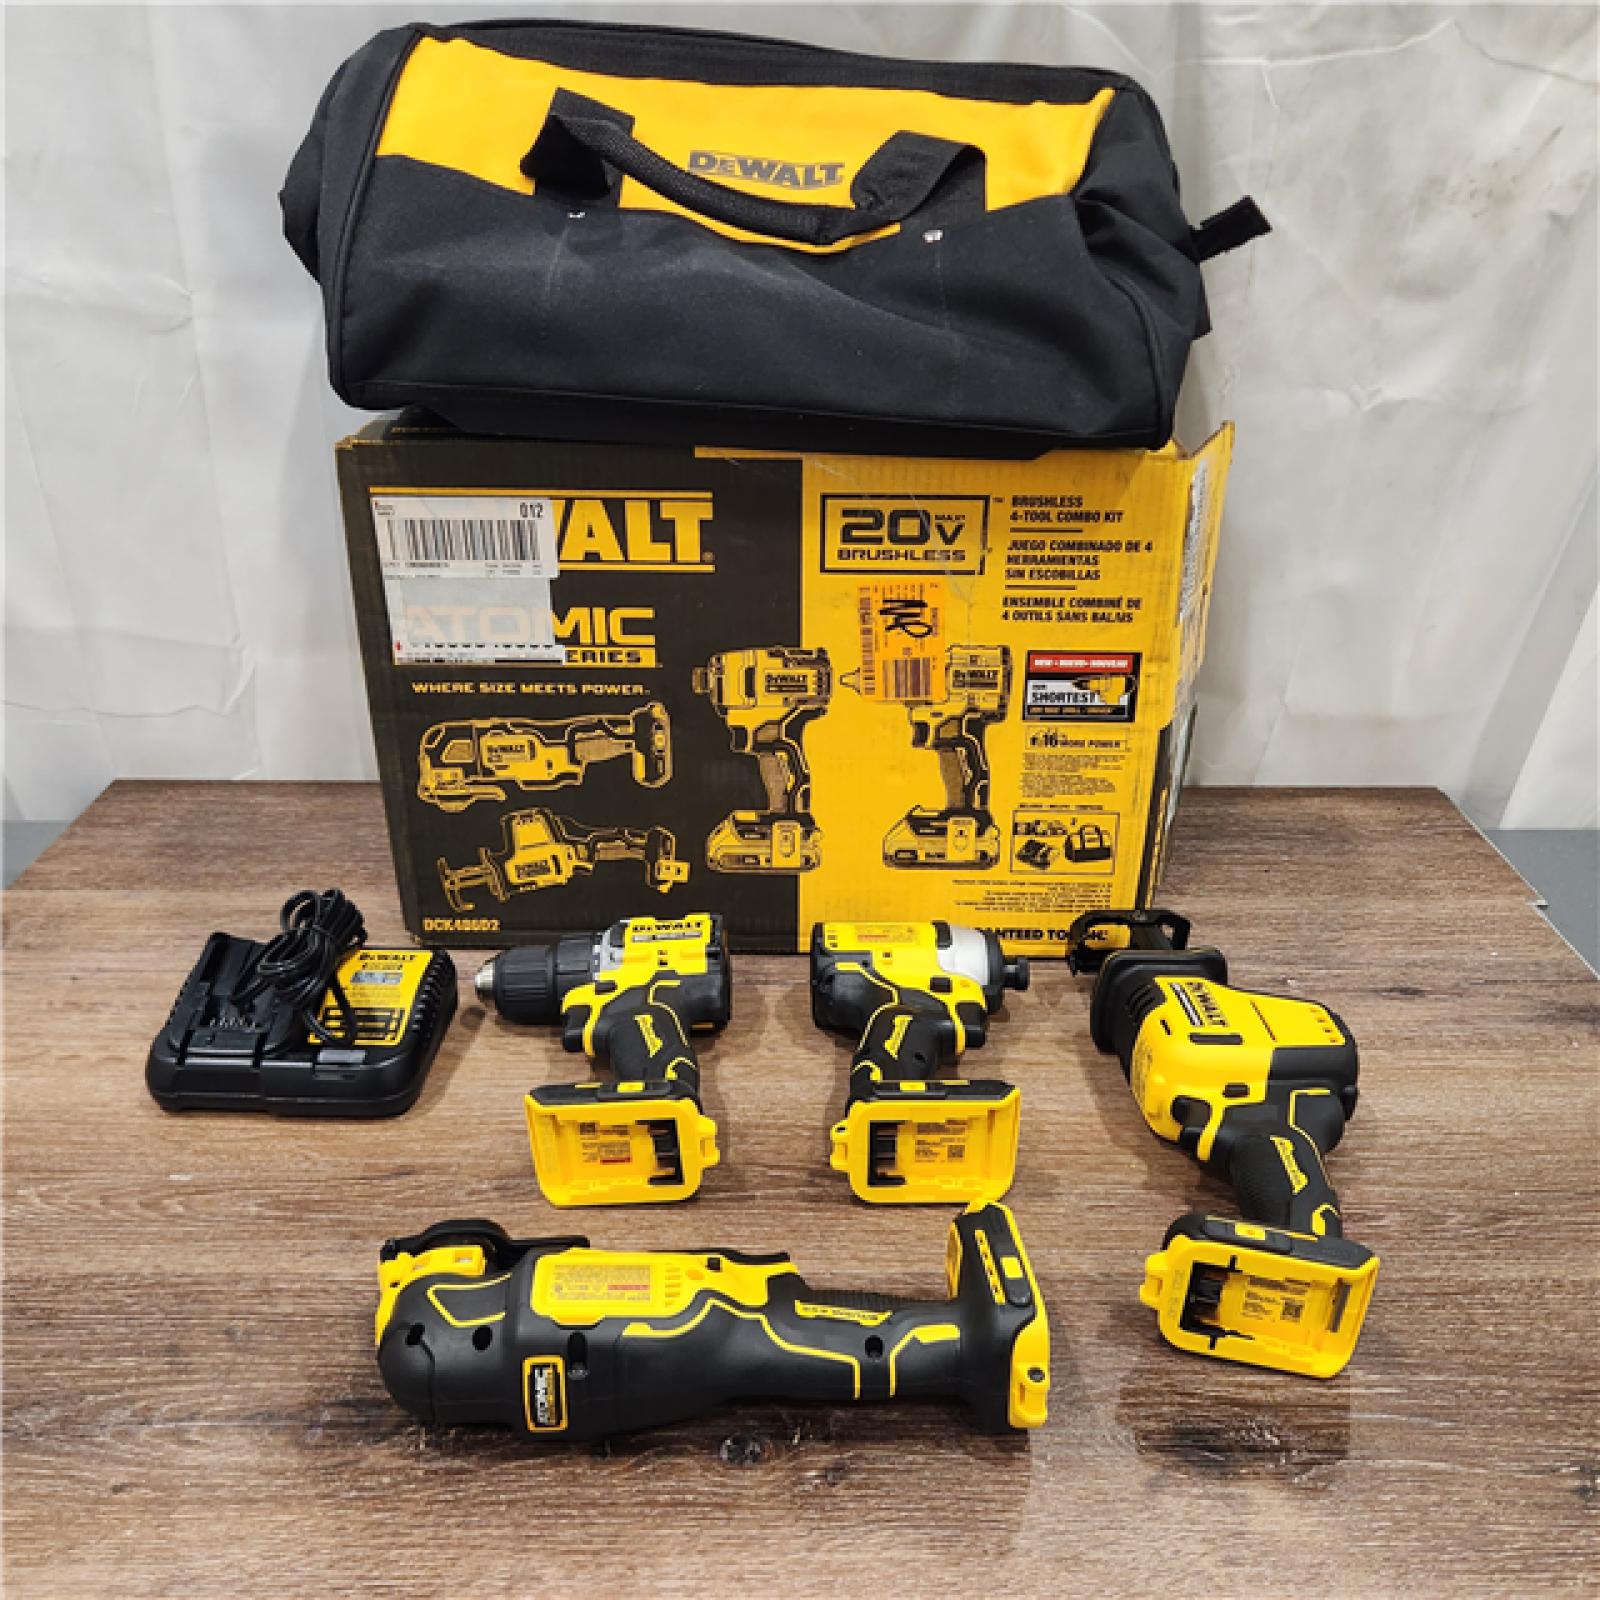 AS-IS DEWALT ATOMIC 20-Volt Lithium-Ion Cordless Brushless Combo Kit (4-Tool)  Charger and Bag battery included